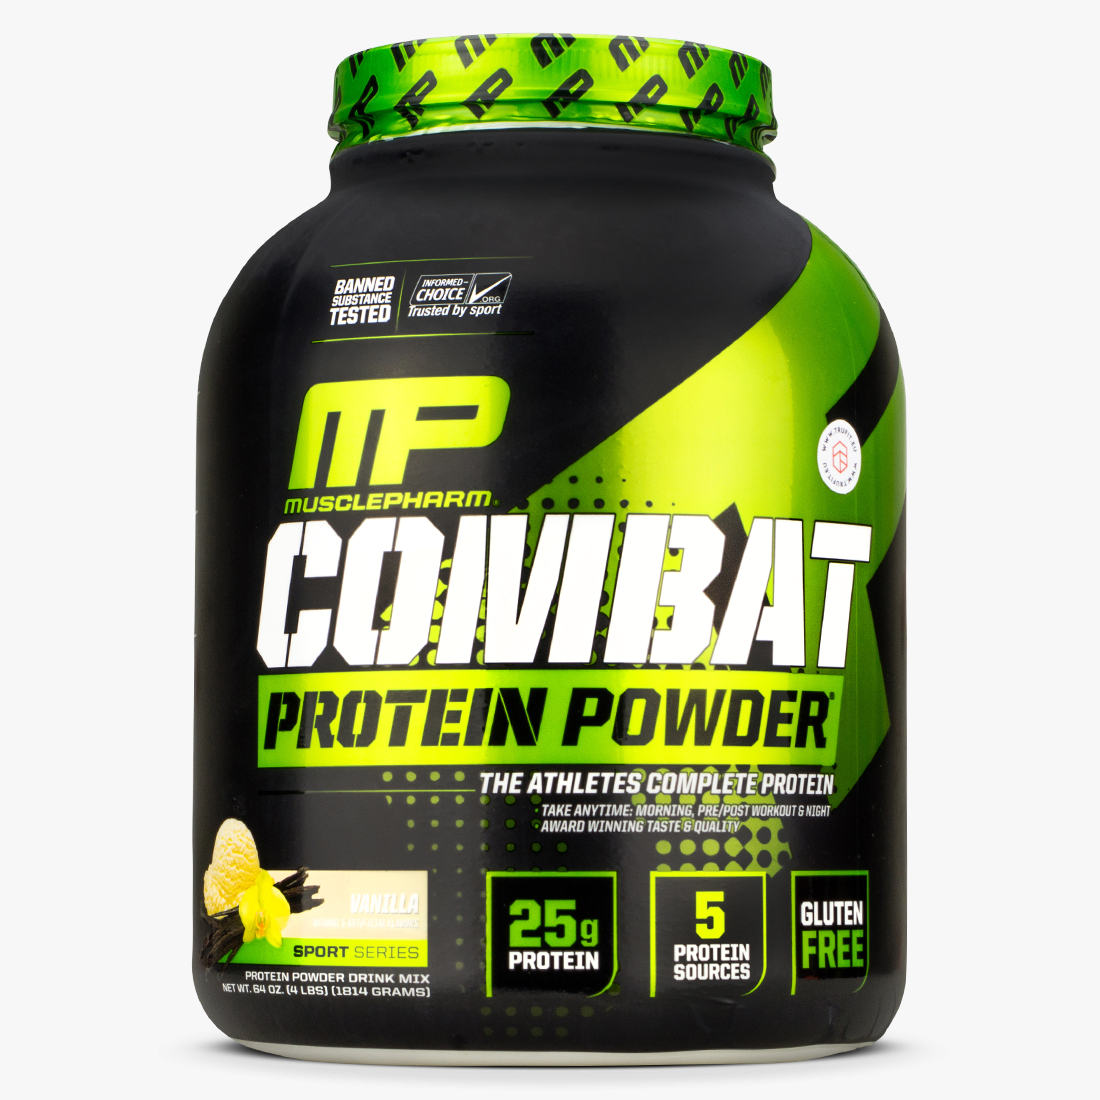 Fit father project protein powder